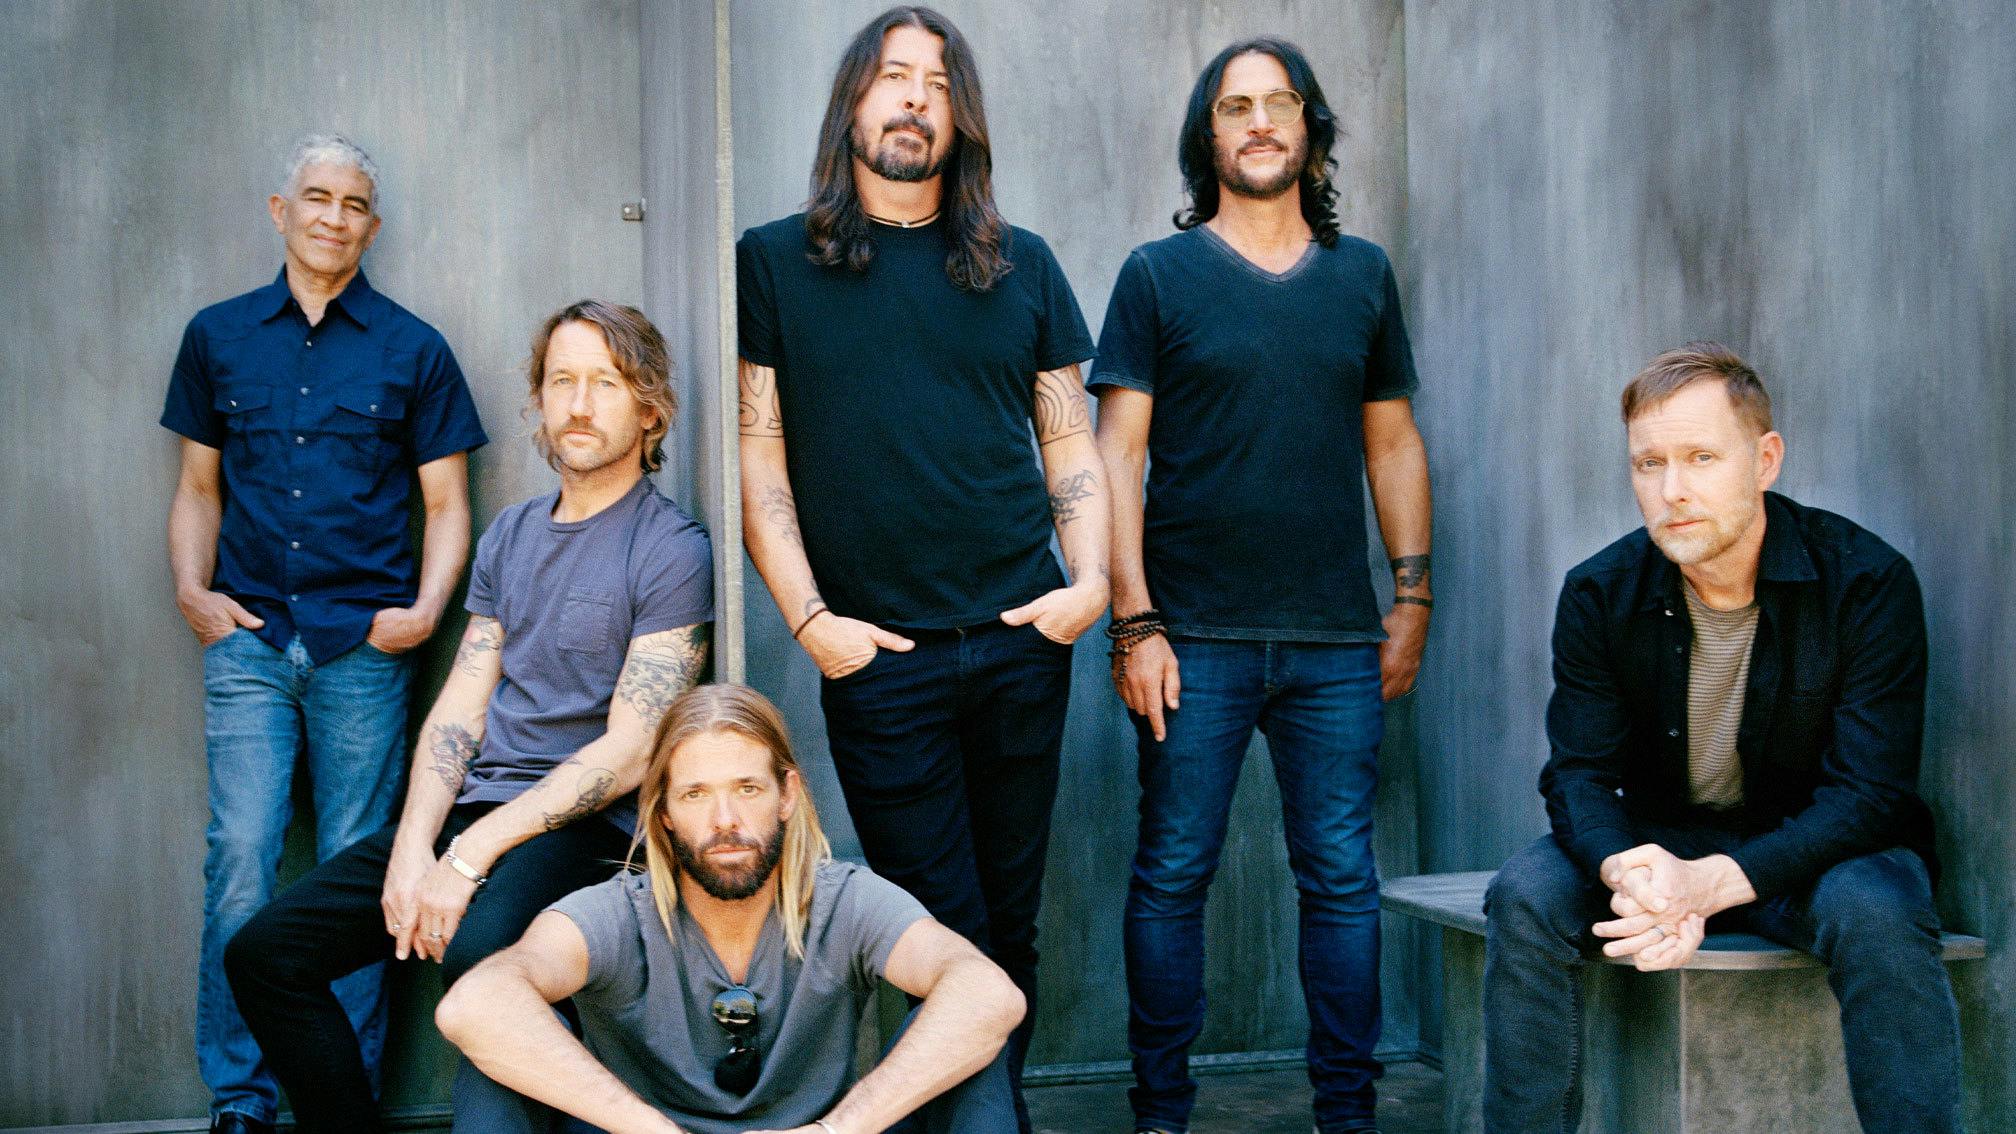 Foo Fighters’ Greatest Hits goes to Number 5 in UK charts following death of Taylor Hawkins